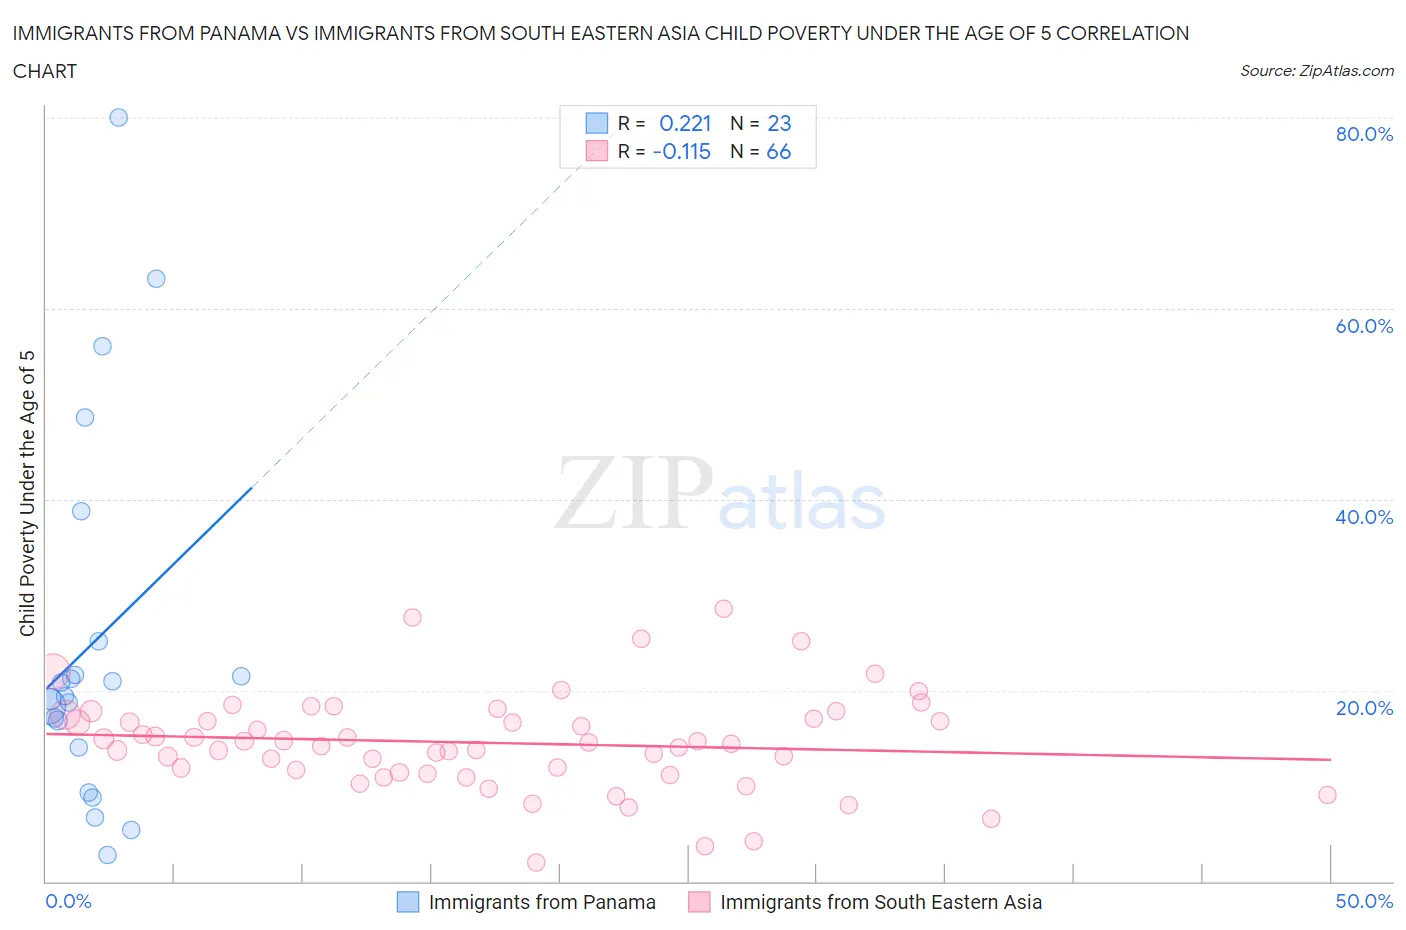 Immigrants from Panama vs Immigrants from South Eastern Asia Child Poverty Under the Age of 5